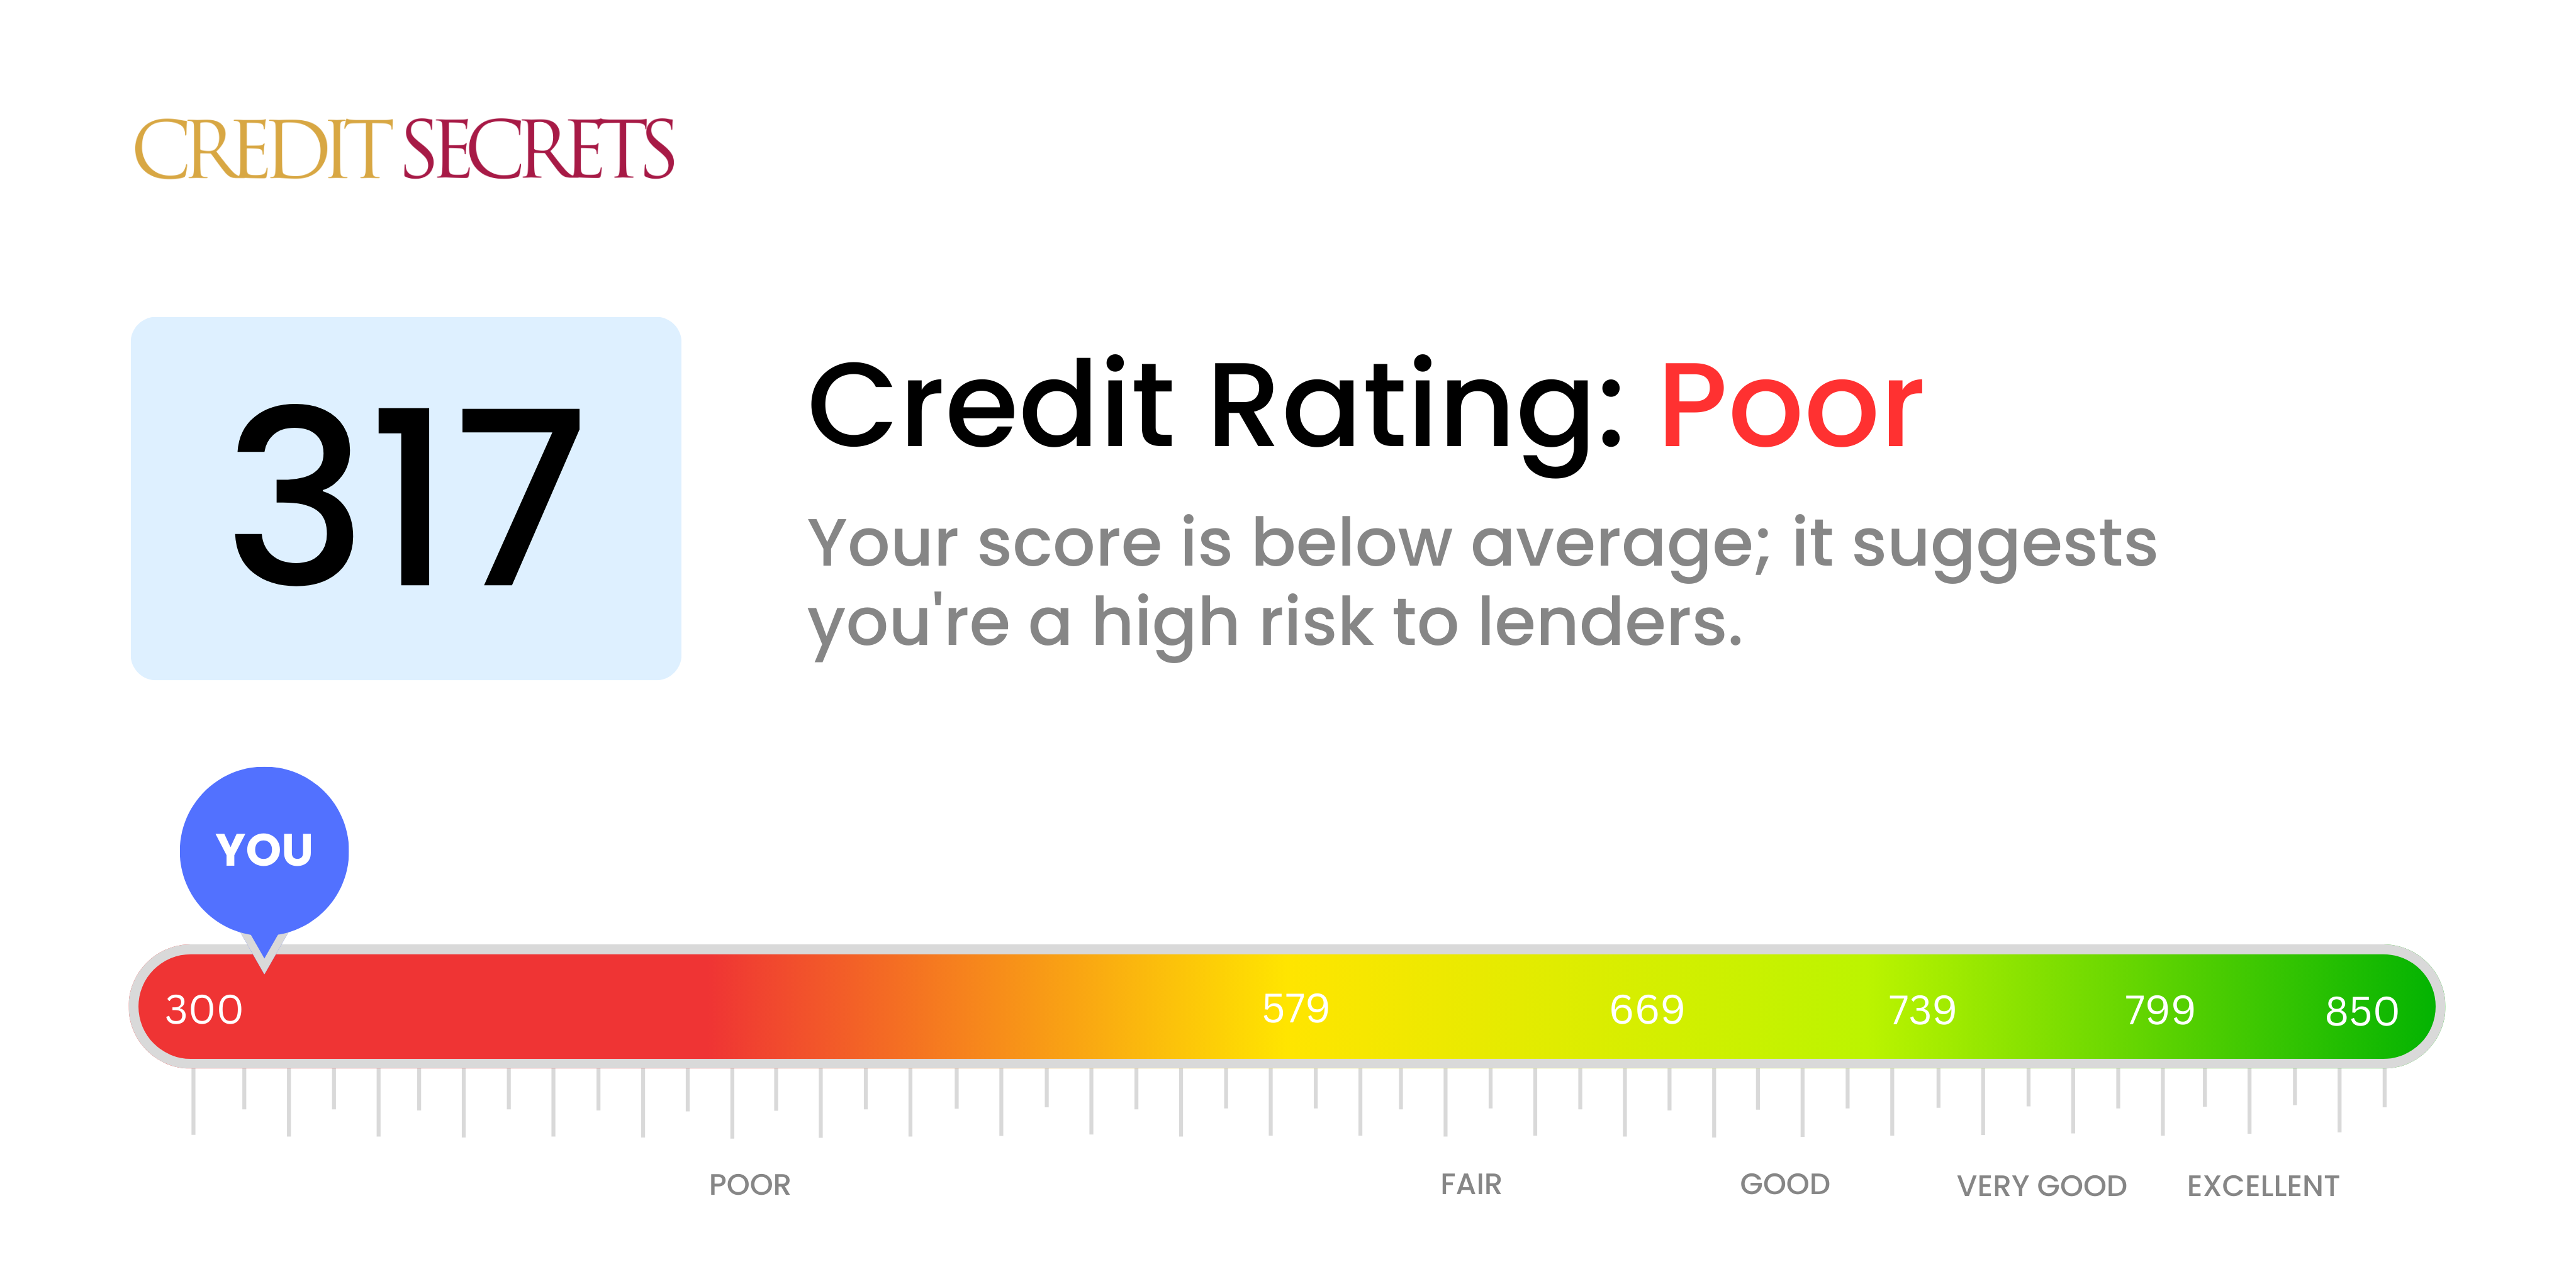 Is 317 a good credit score?